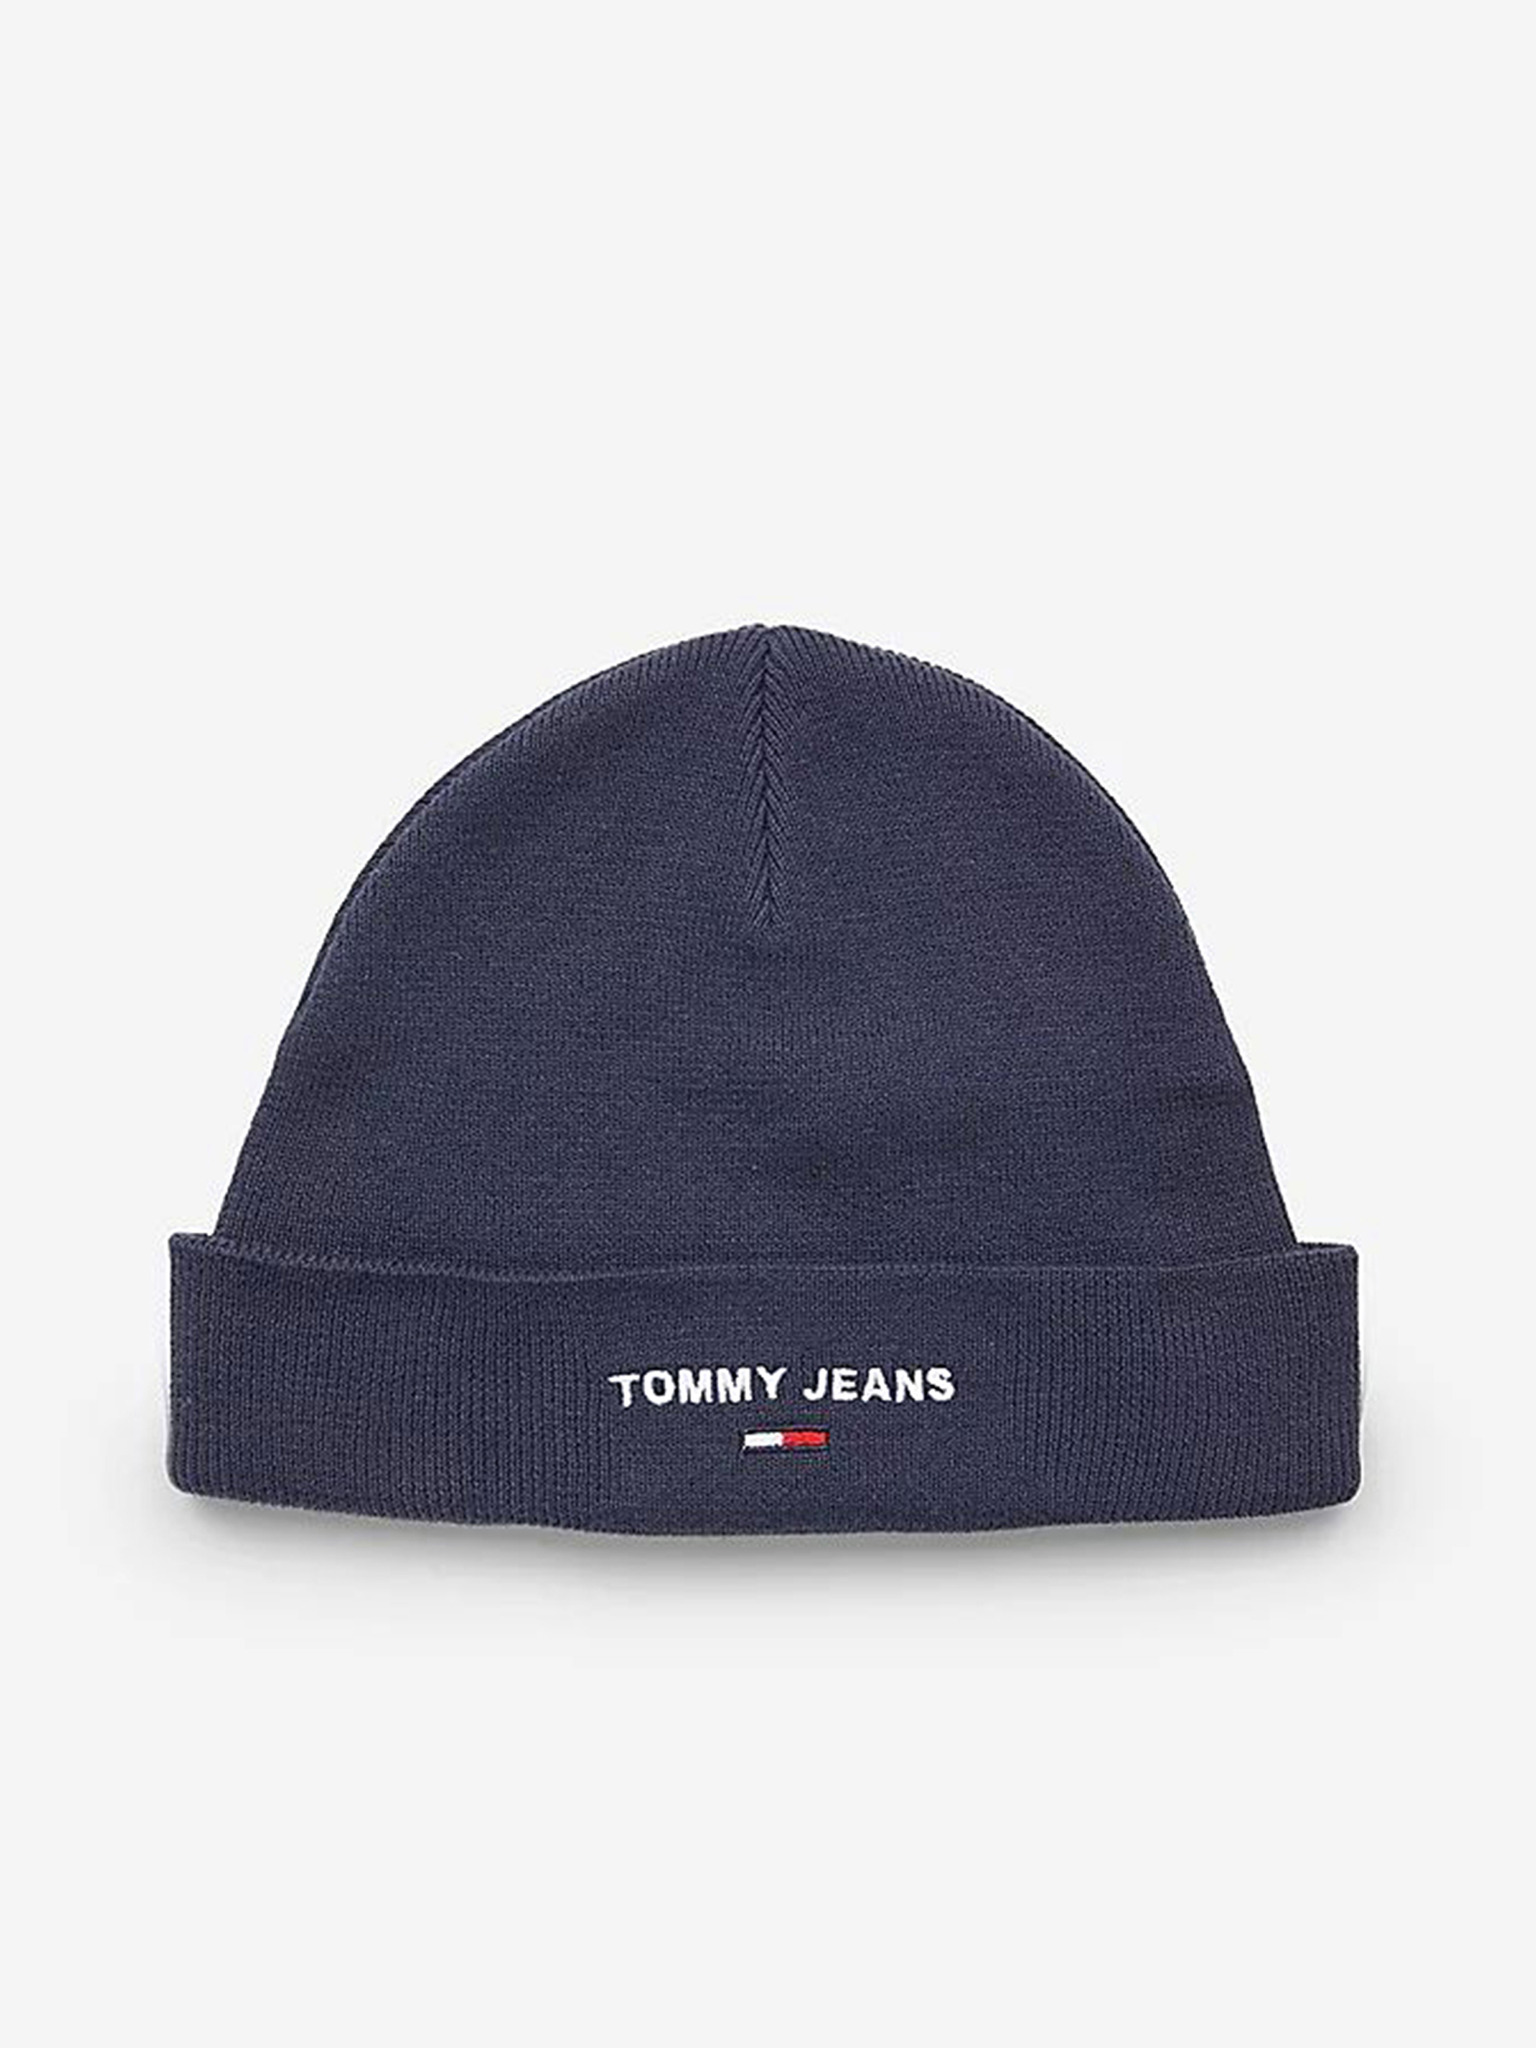 Jeans Beanie - Tommy